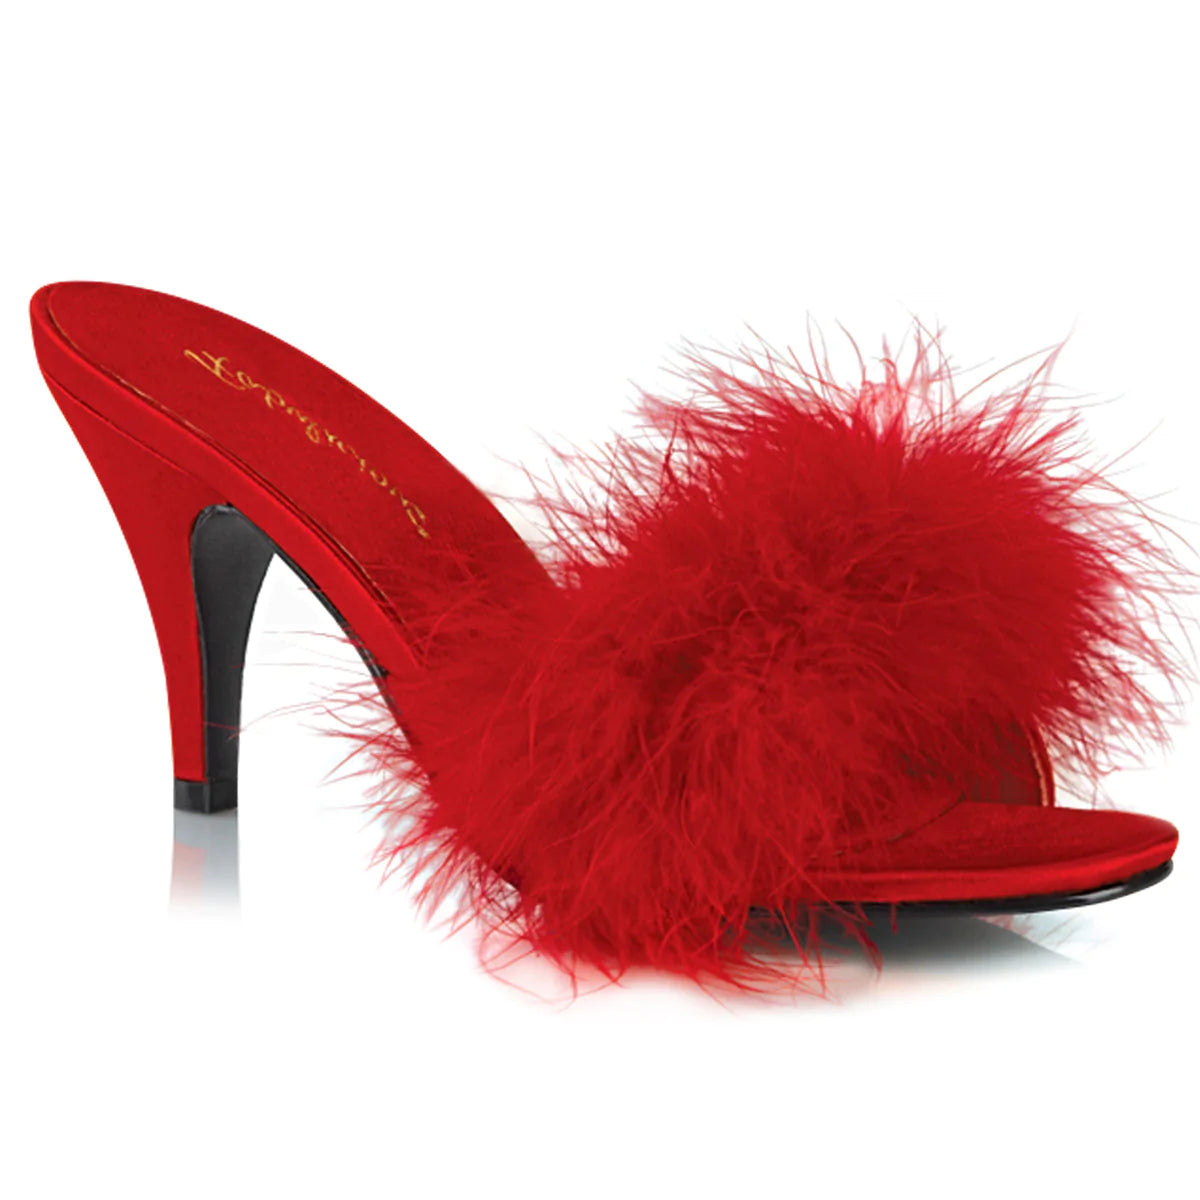 The right side of the red Amour 3" Classic Marabou Slipper.